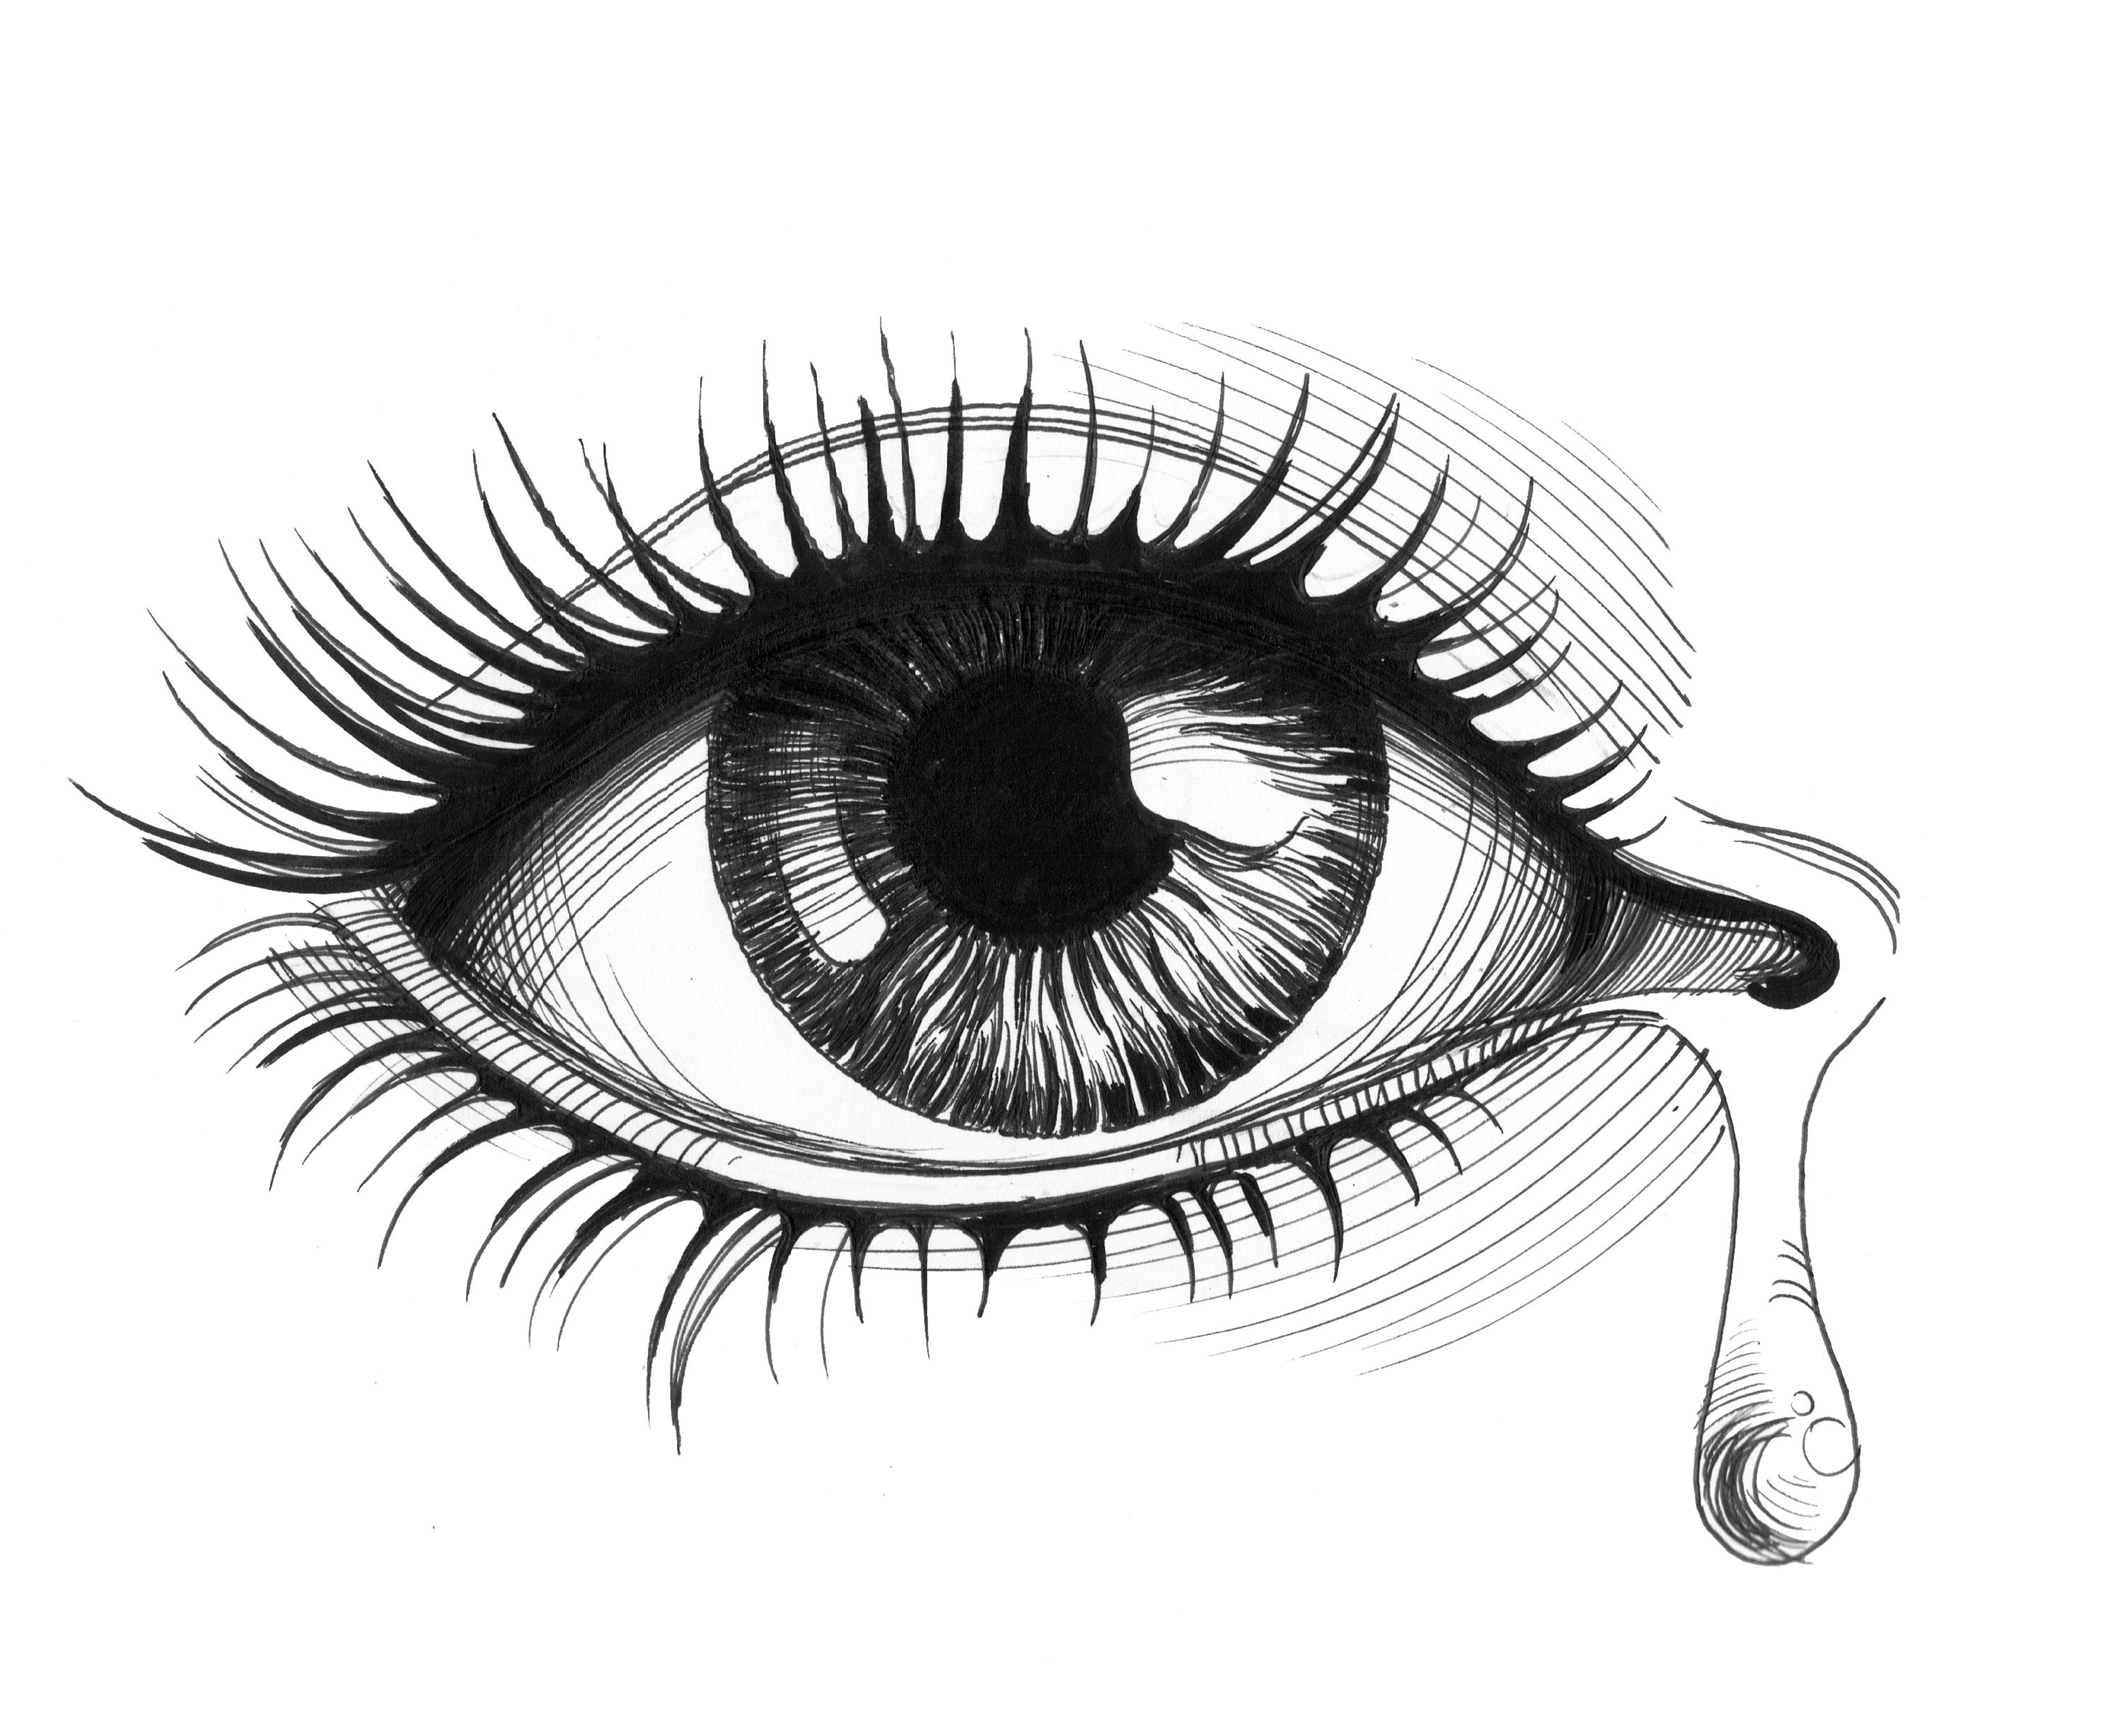 Practice realistic drawing of a teary eye _ step by step drawing tutorial -  YouTube